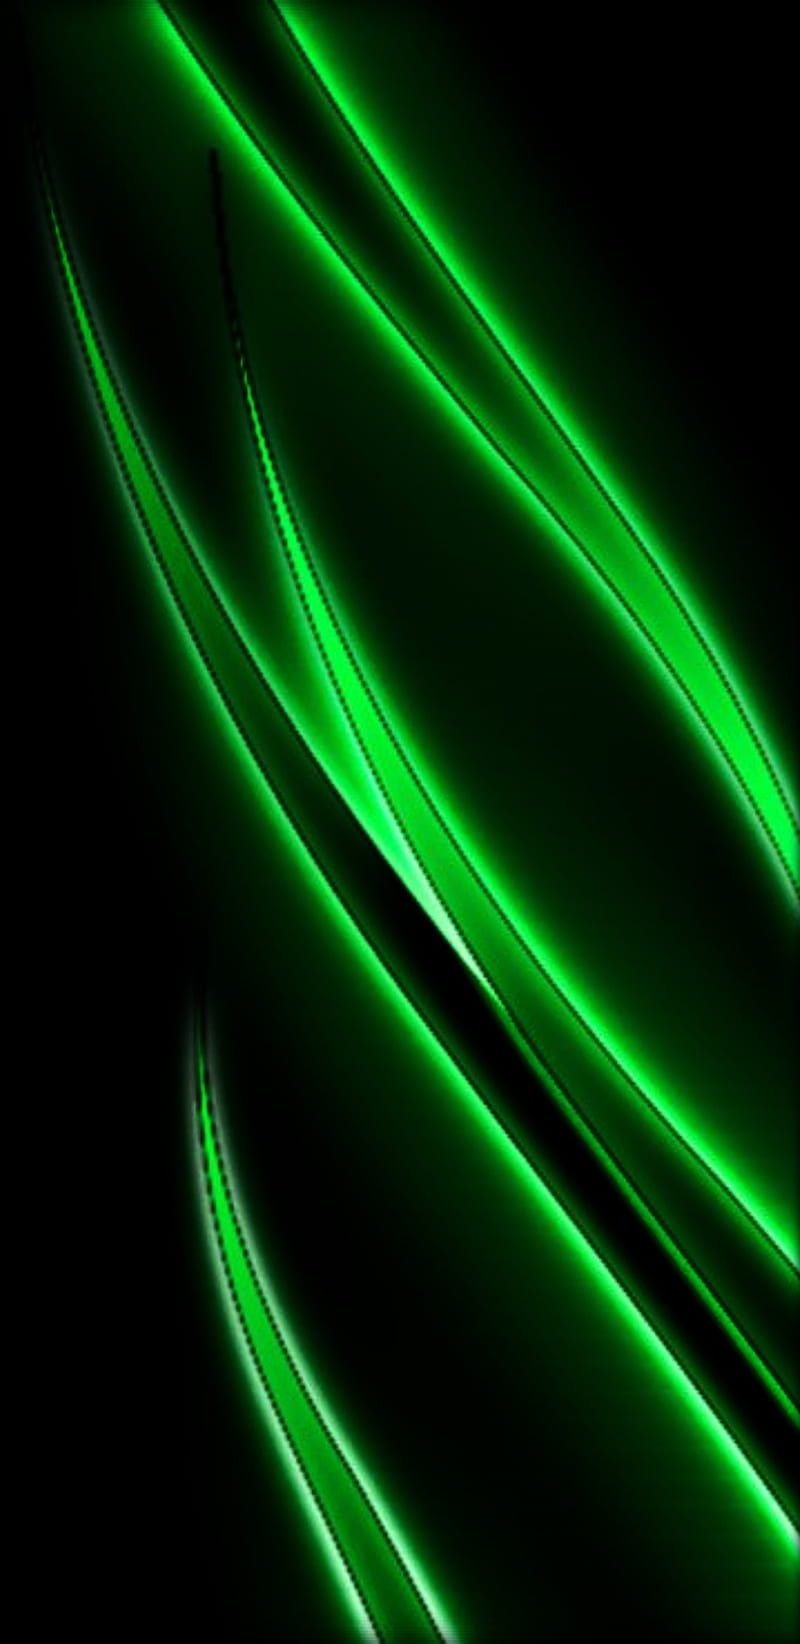 1920x1080px, 1080P free download Green Wavy, abstract, black, color